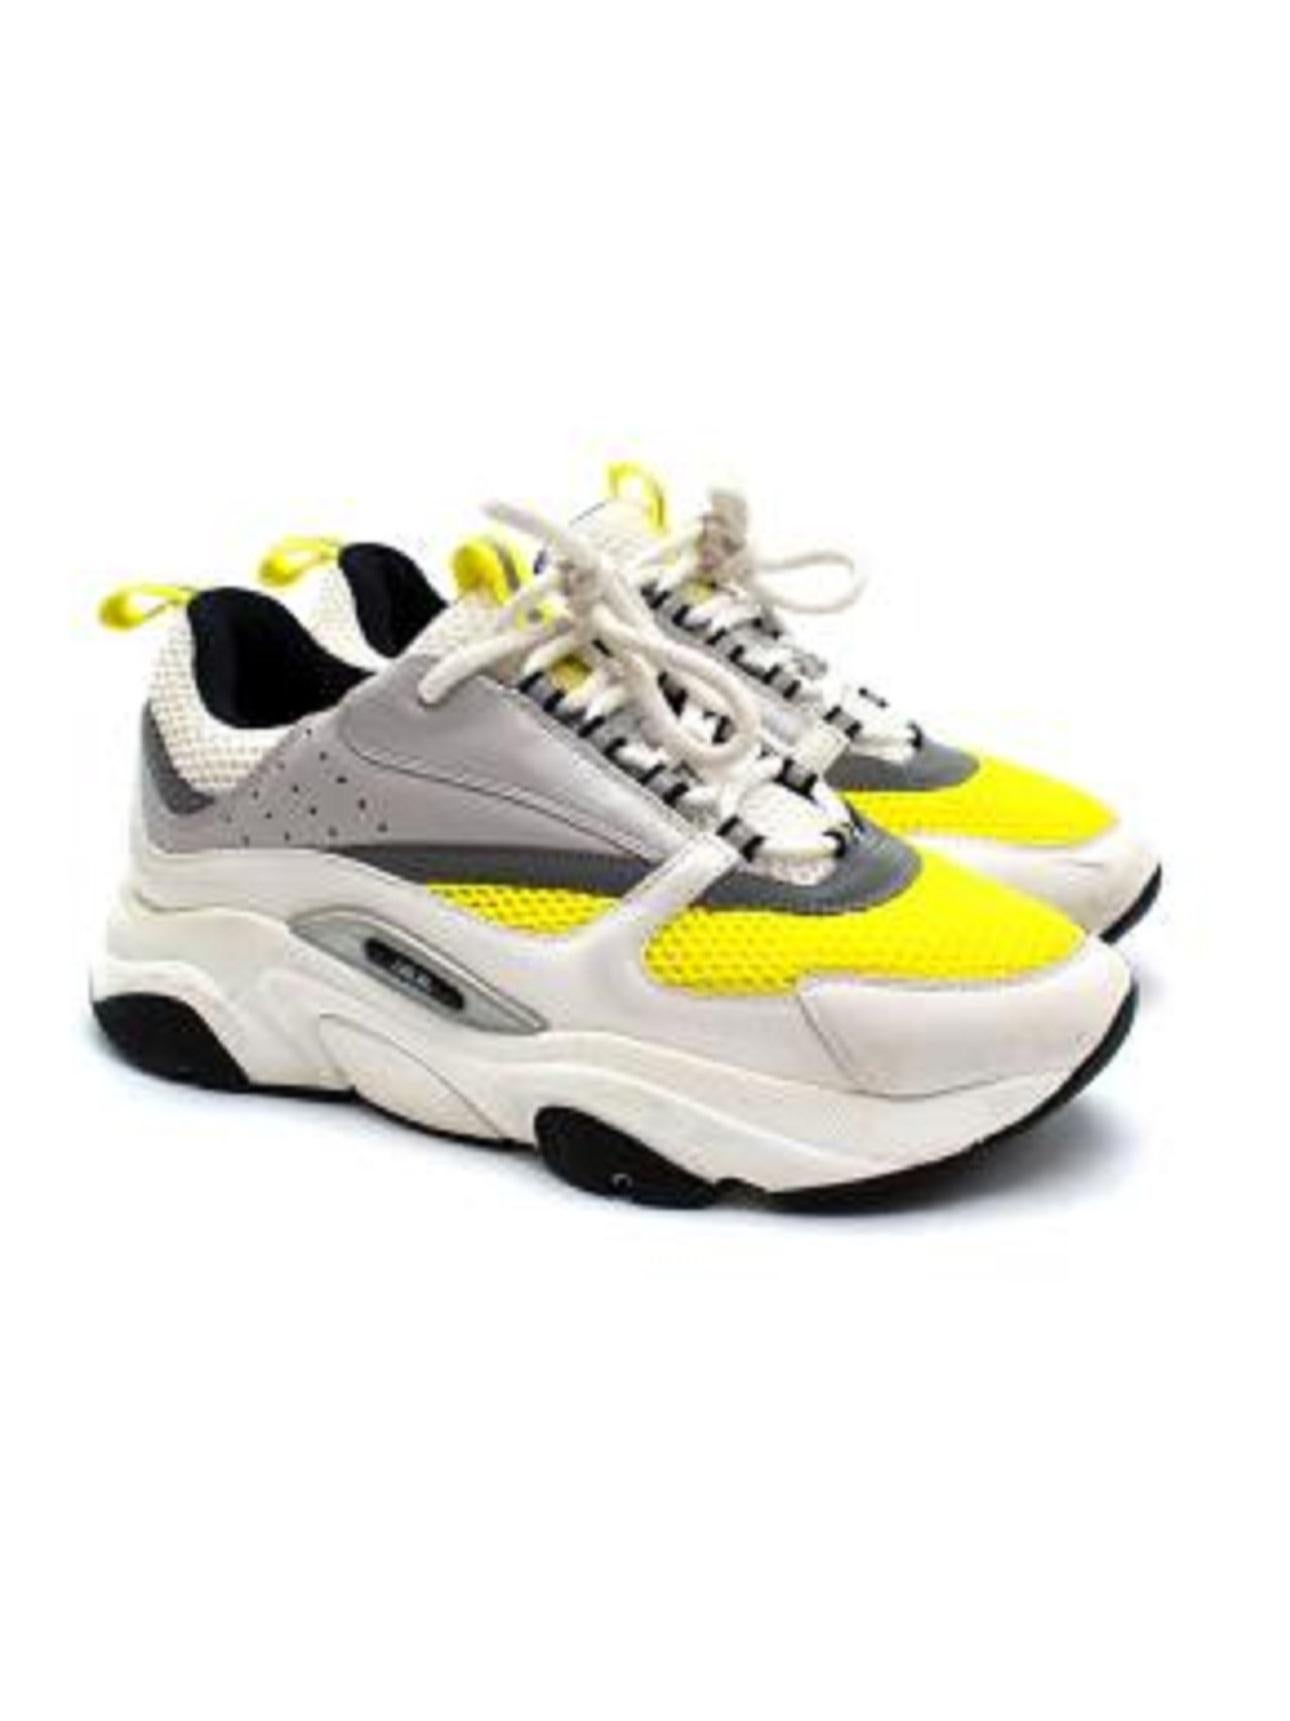 Dior Yellow & White B22 Sneakers

-Raised 'DIOR' signature on the side
-Round toe 
-White technical mesh
-White and silver smooth calfskin
-'DIOR' signature on the side
-Low-top
-Nylon tabs and lace-up closure
-Nylon and calfskin lining
-Sculpted